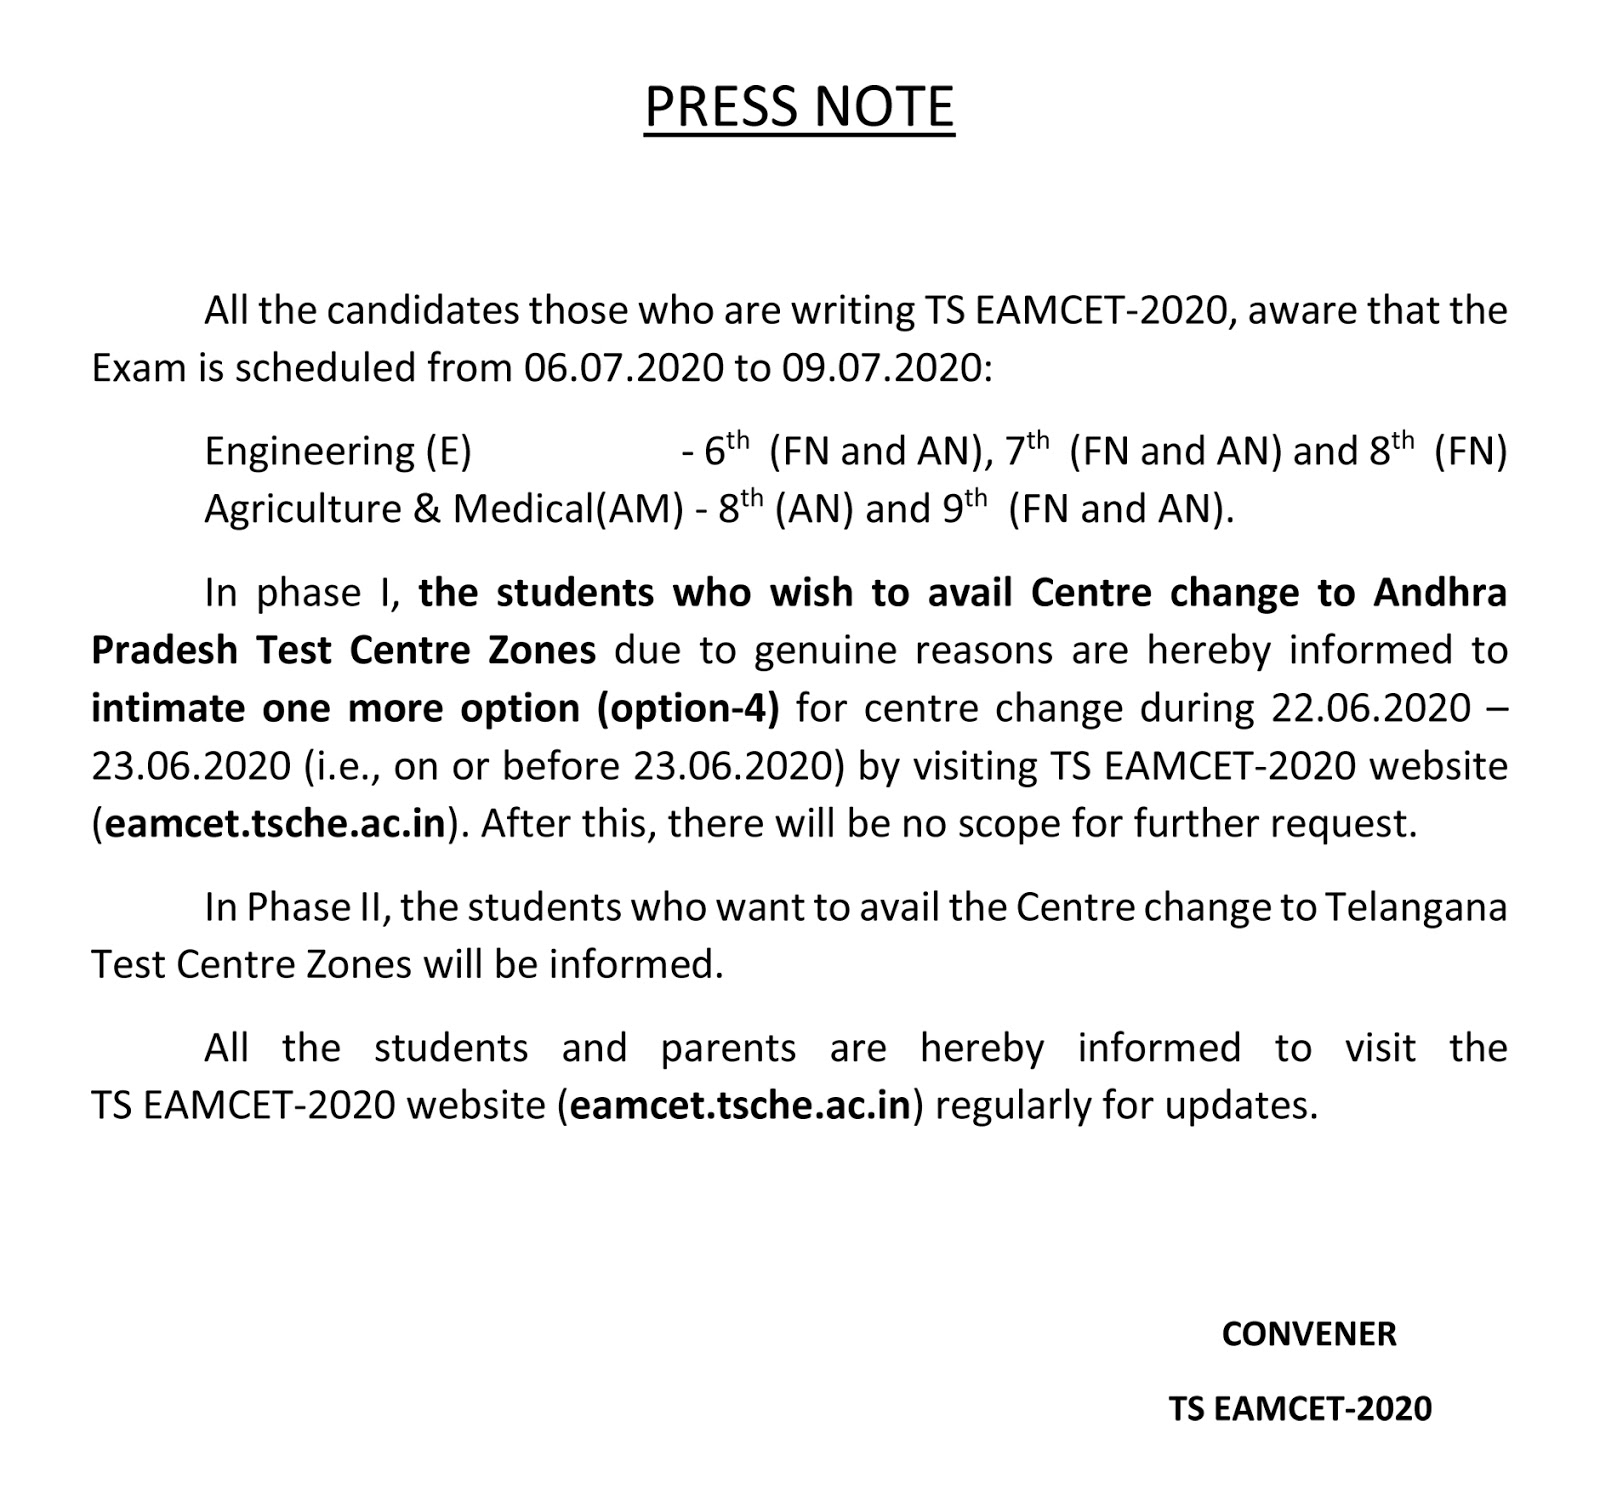 TS Eamcet 2020 aware that the Exam Scheduled